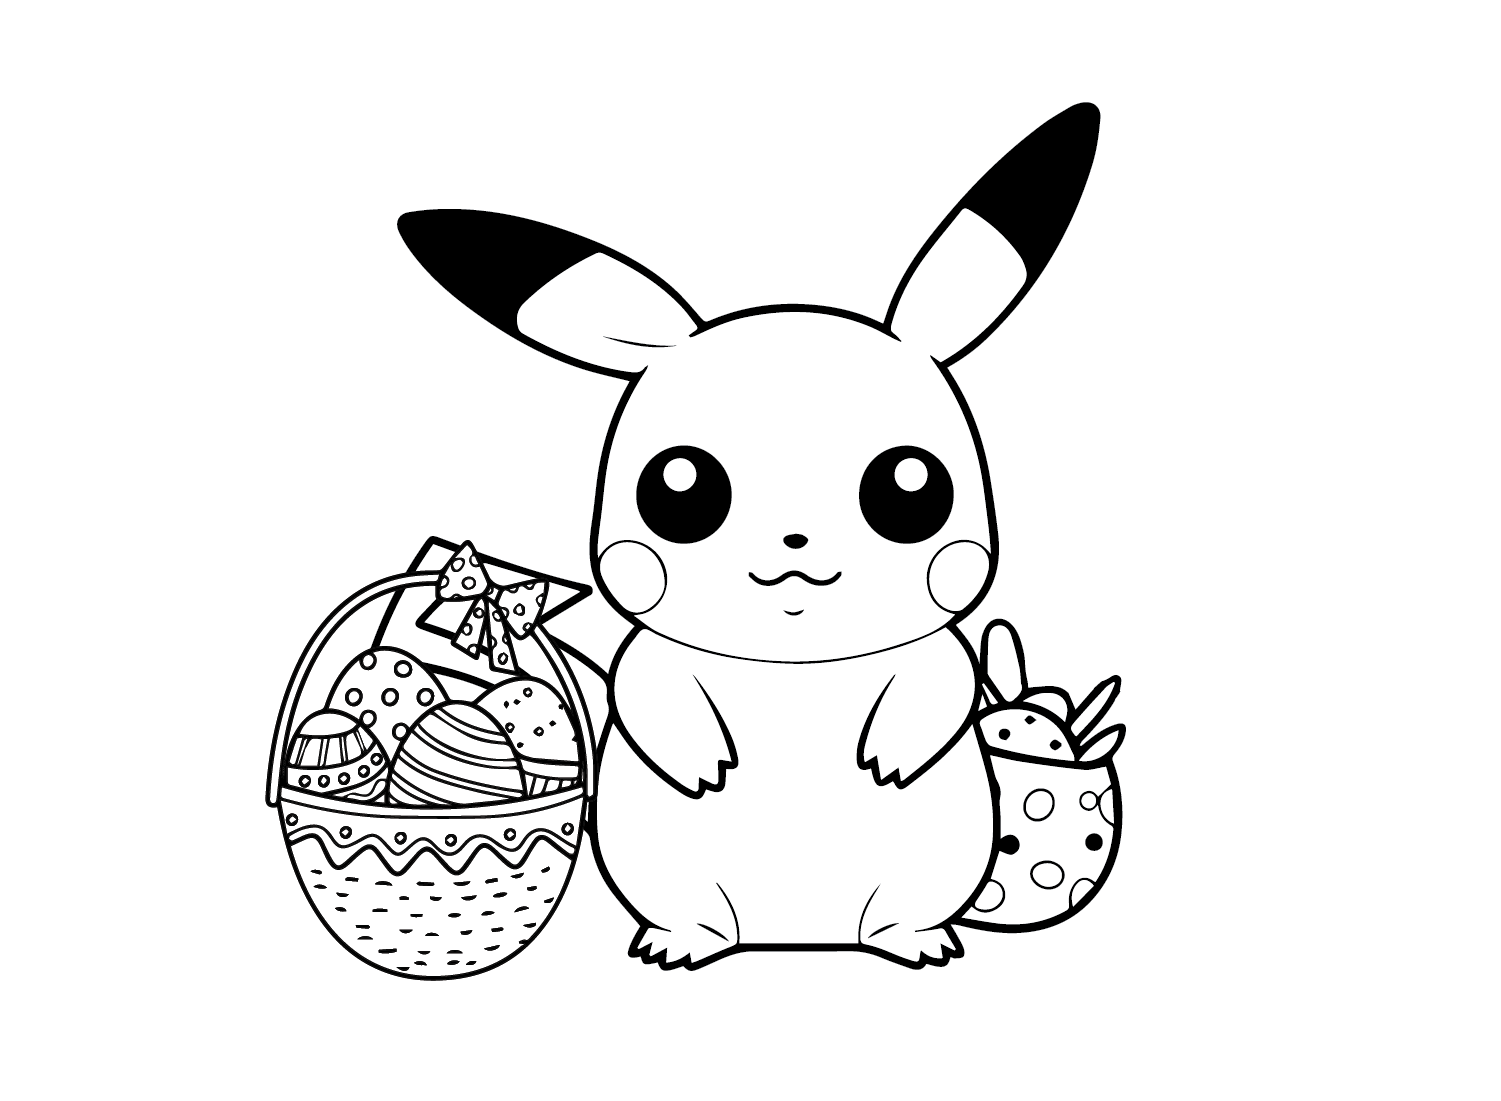 Pikachu Easter Coloring Page